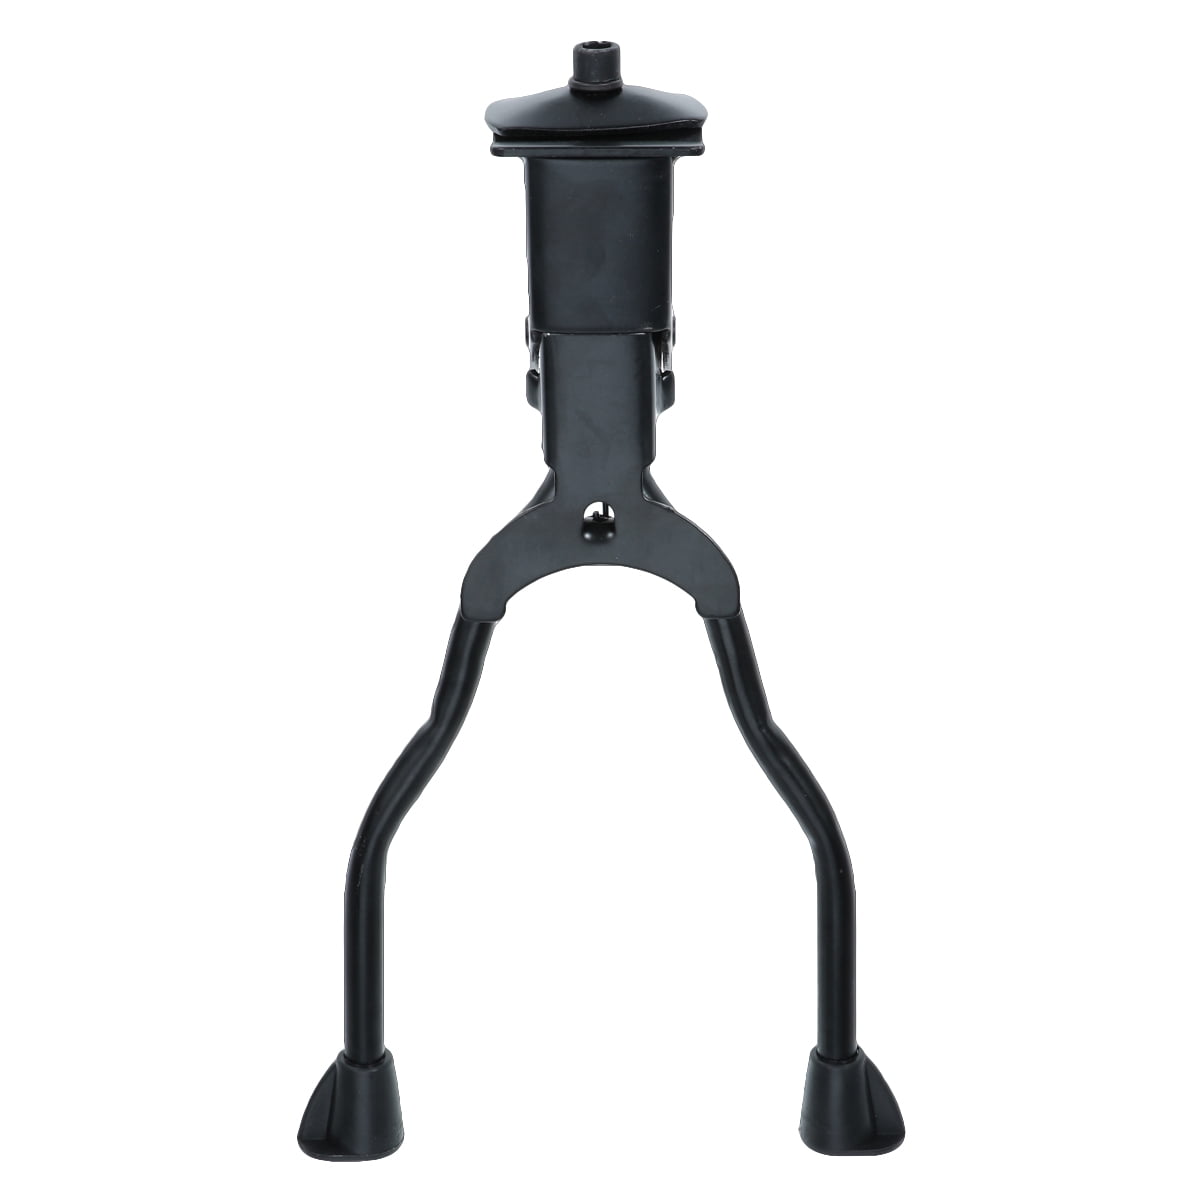 Details about   Stable Iron Double Leg Mount Stand Bike Bicycle Kickstand Kick Stand  N#S7 